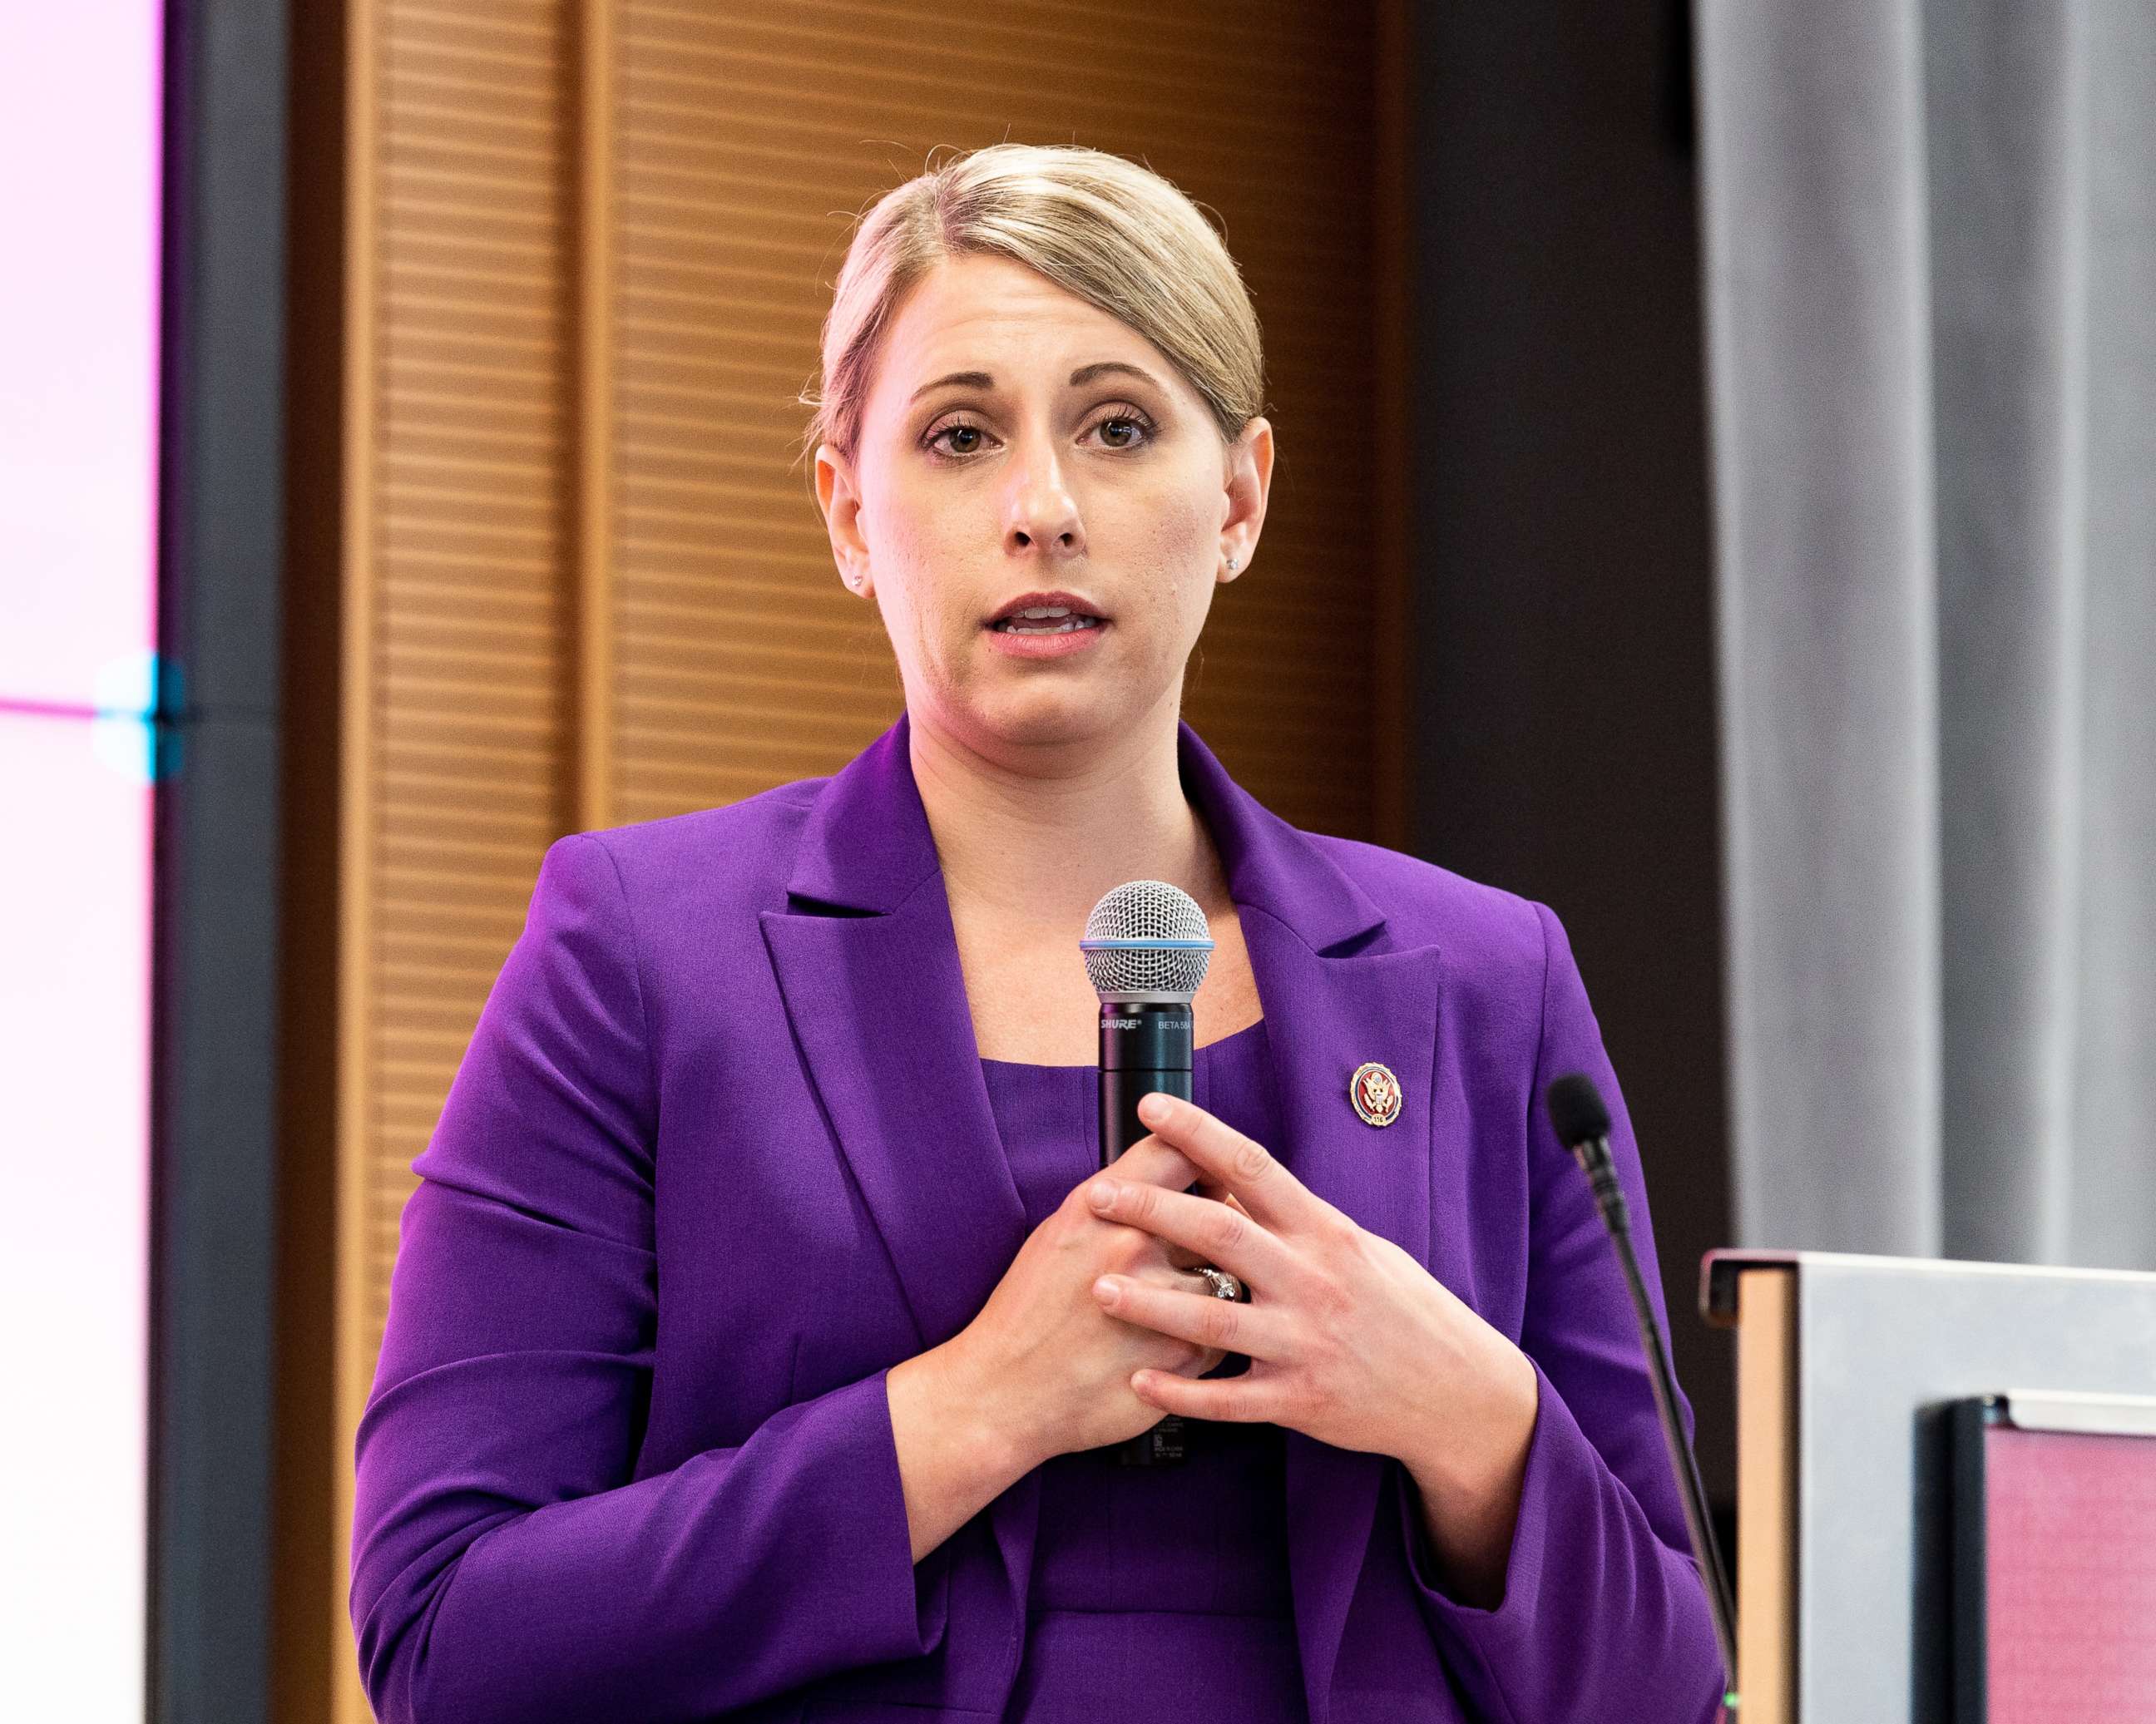 PHOTO:Representative Katie Hill speaks at the Ignite Young Women Run D.C. Conference in Washington, D.C.